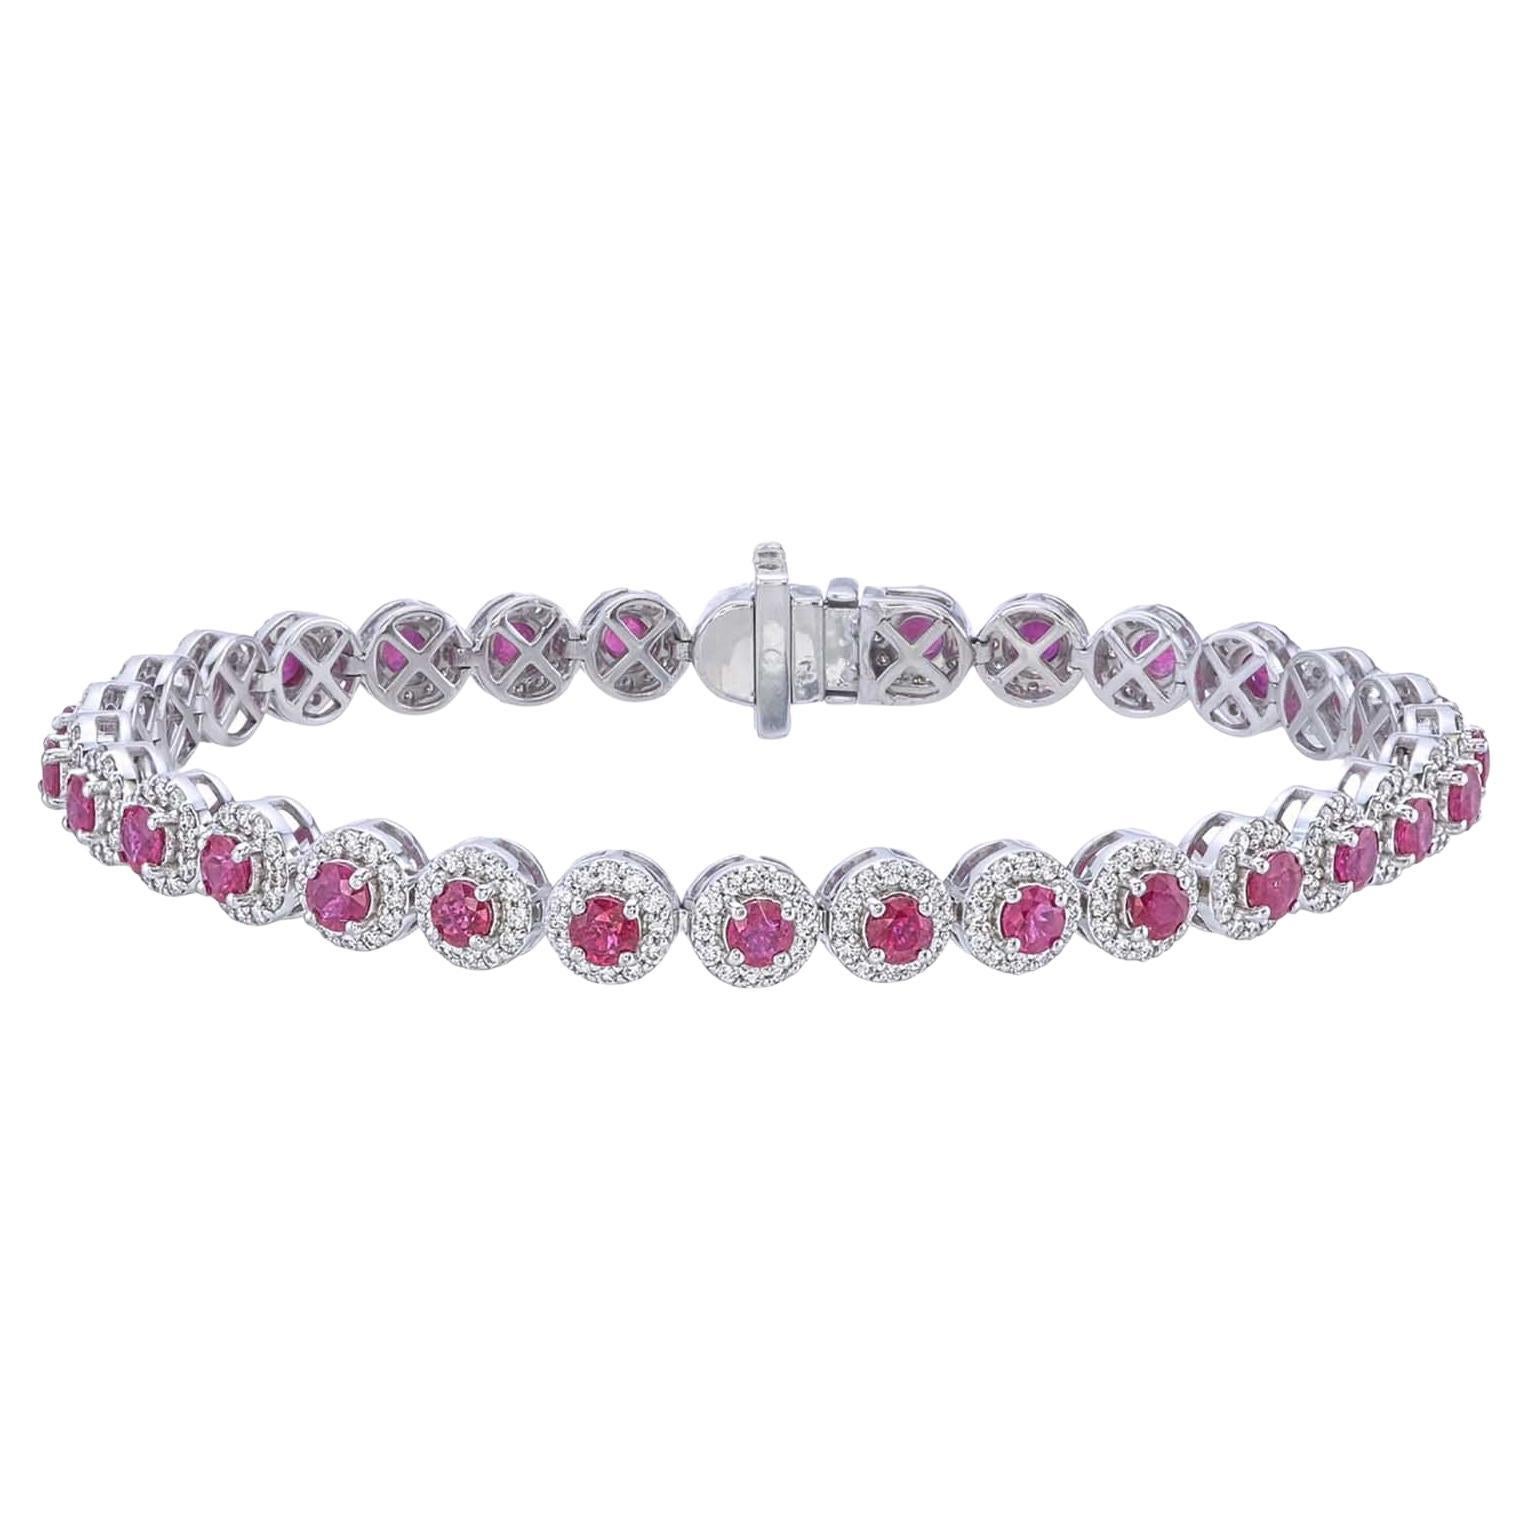 Tennis soft bracelet with all around ruby with a halo of round diamonds